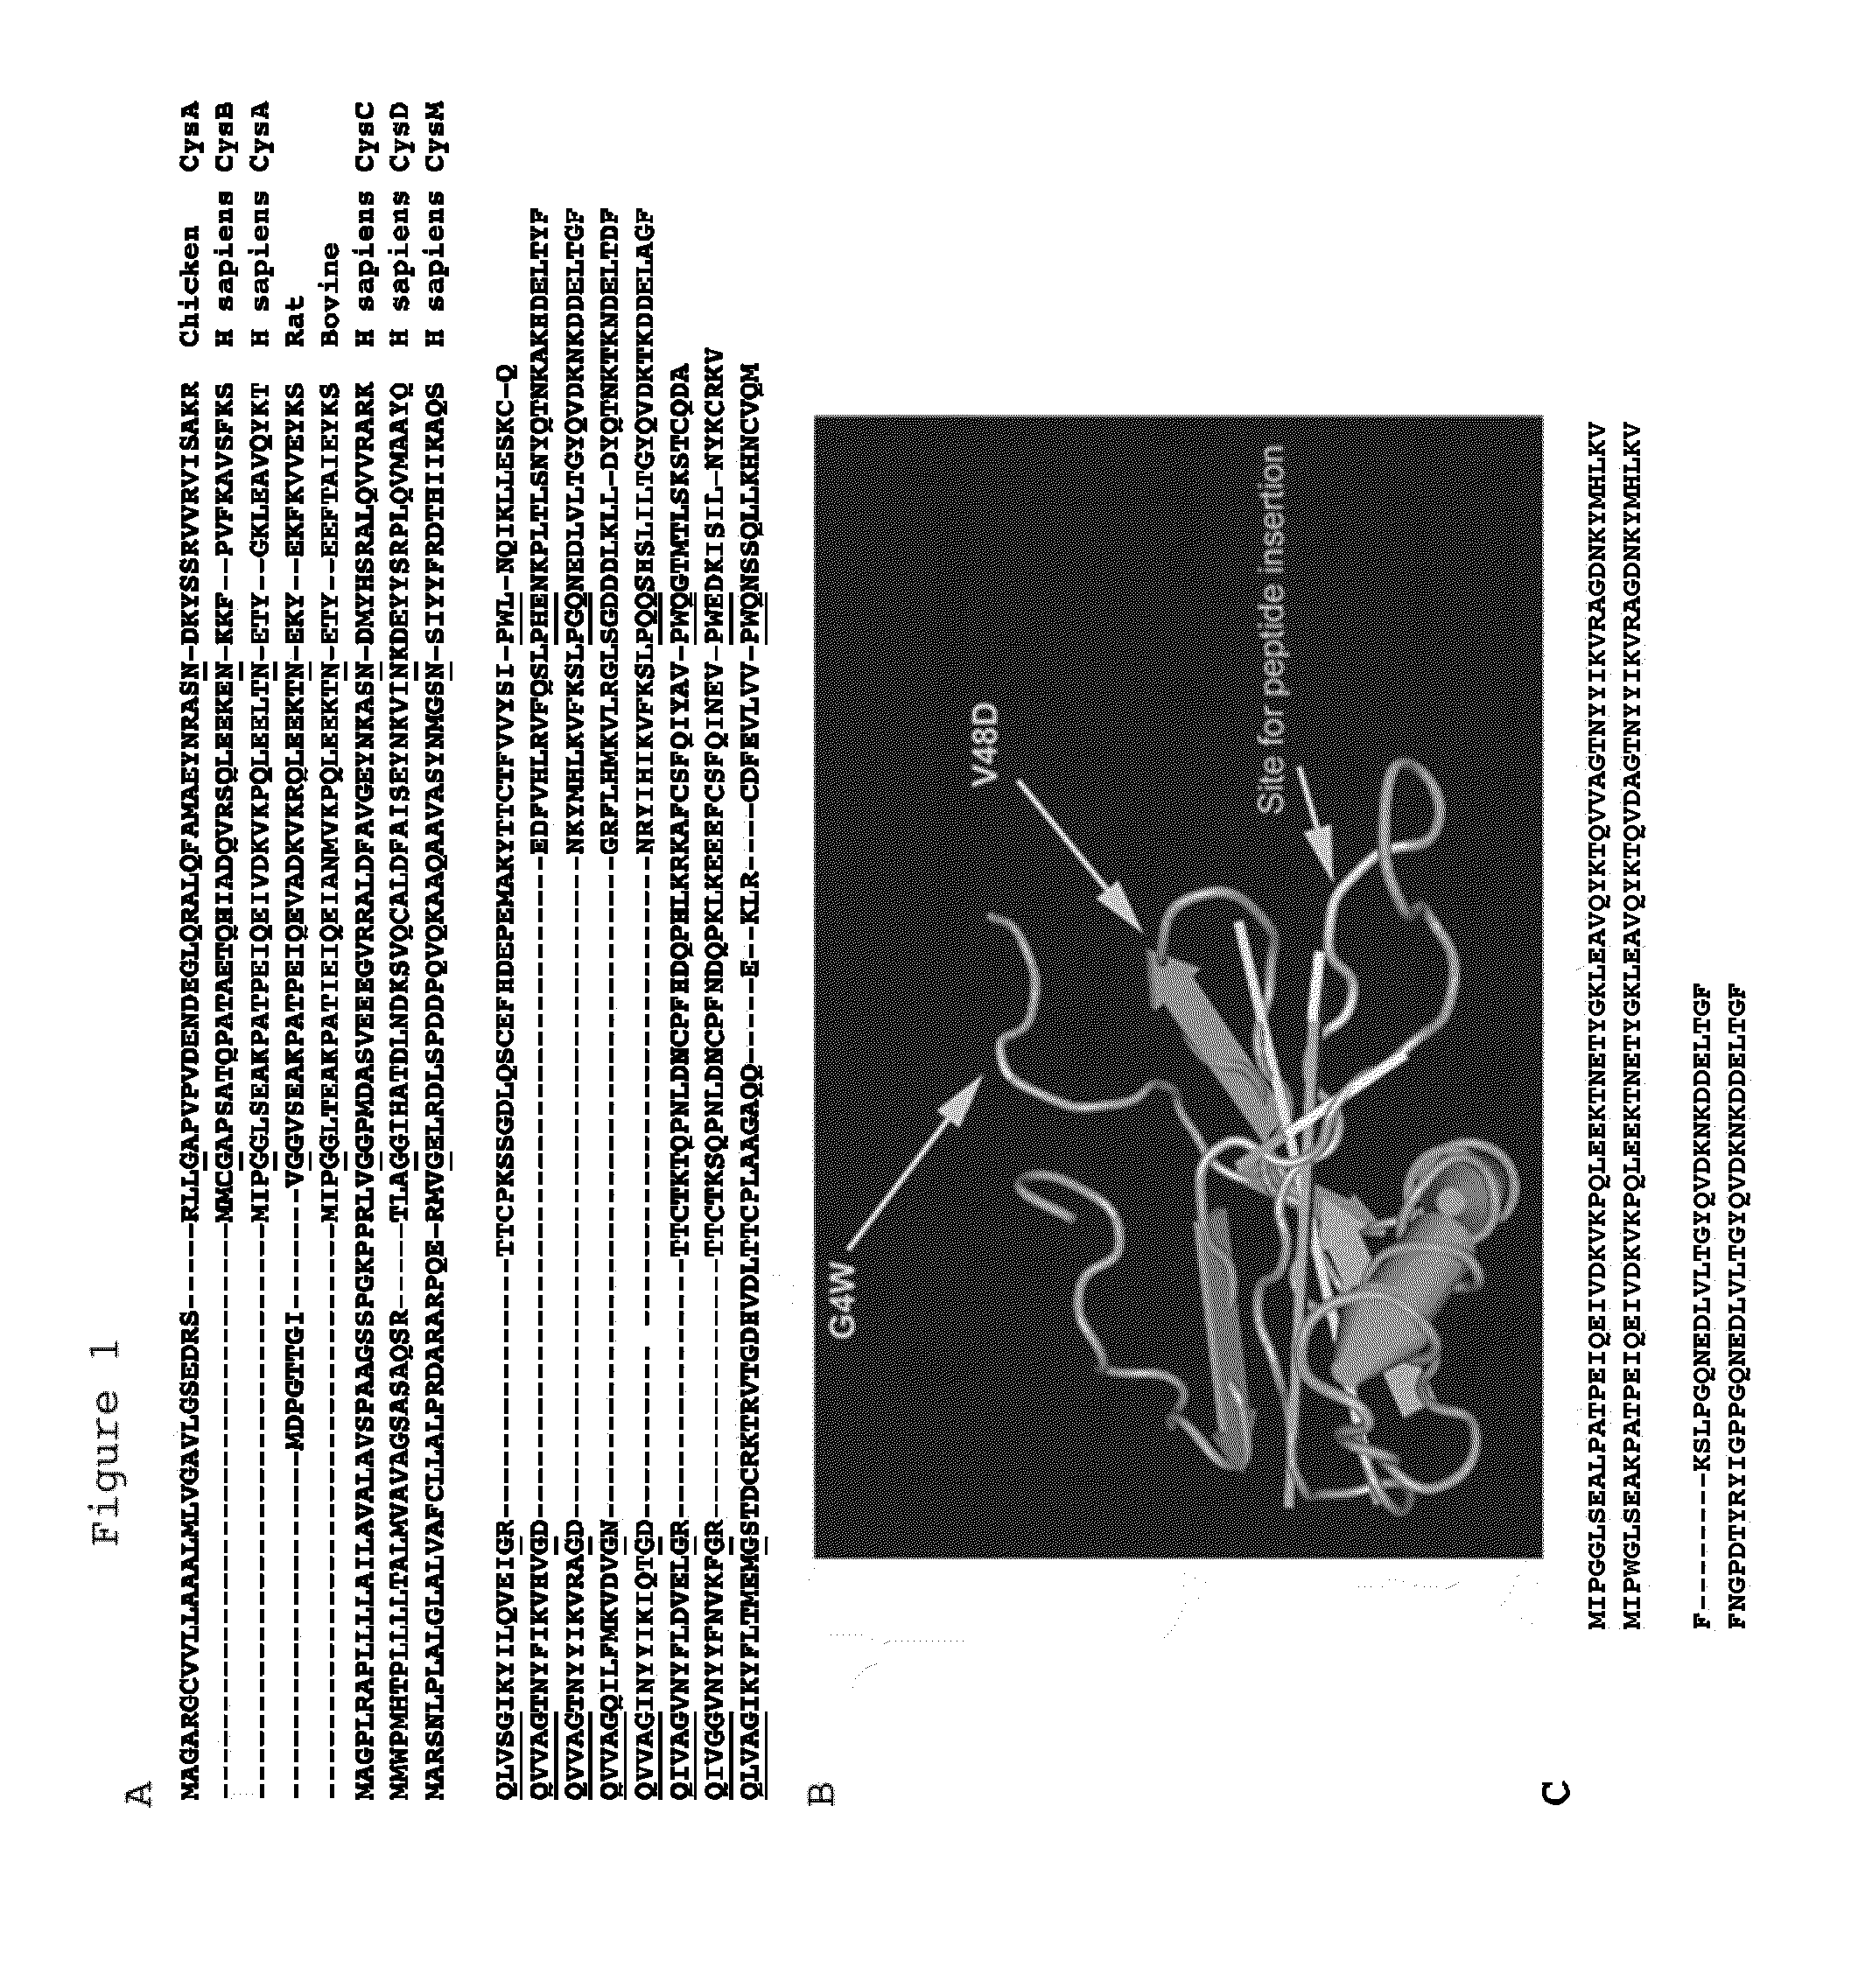 Scaffold polypeptides for heterologous peptide display